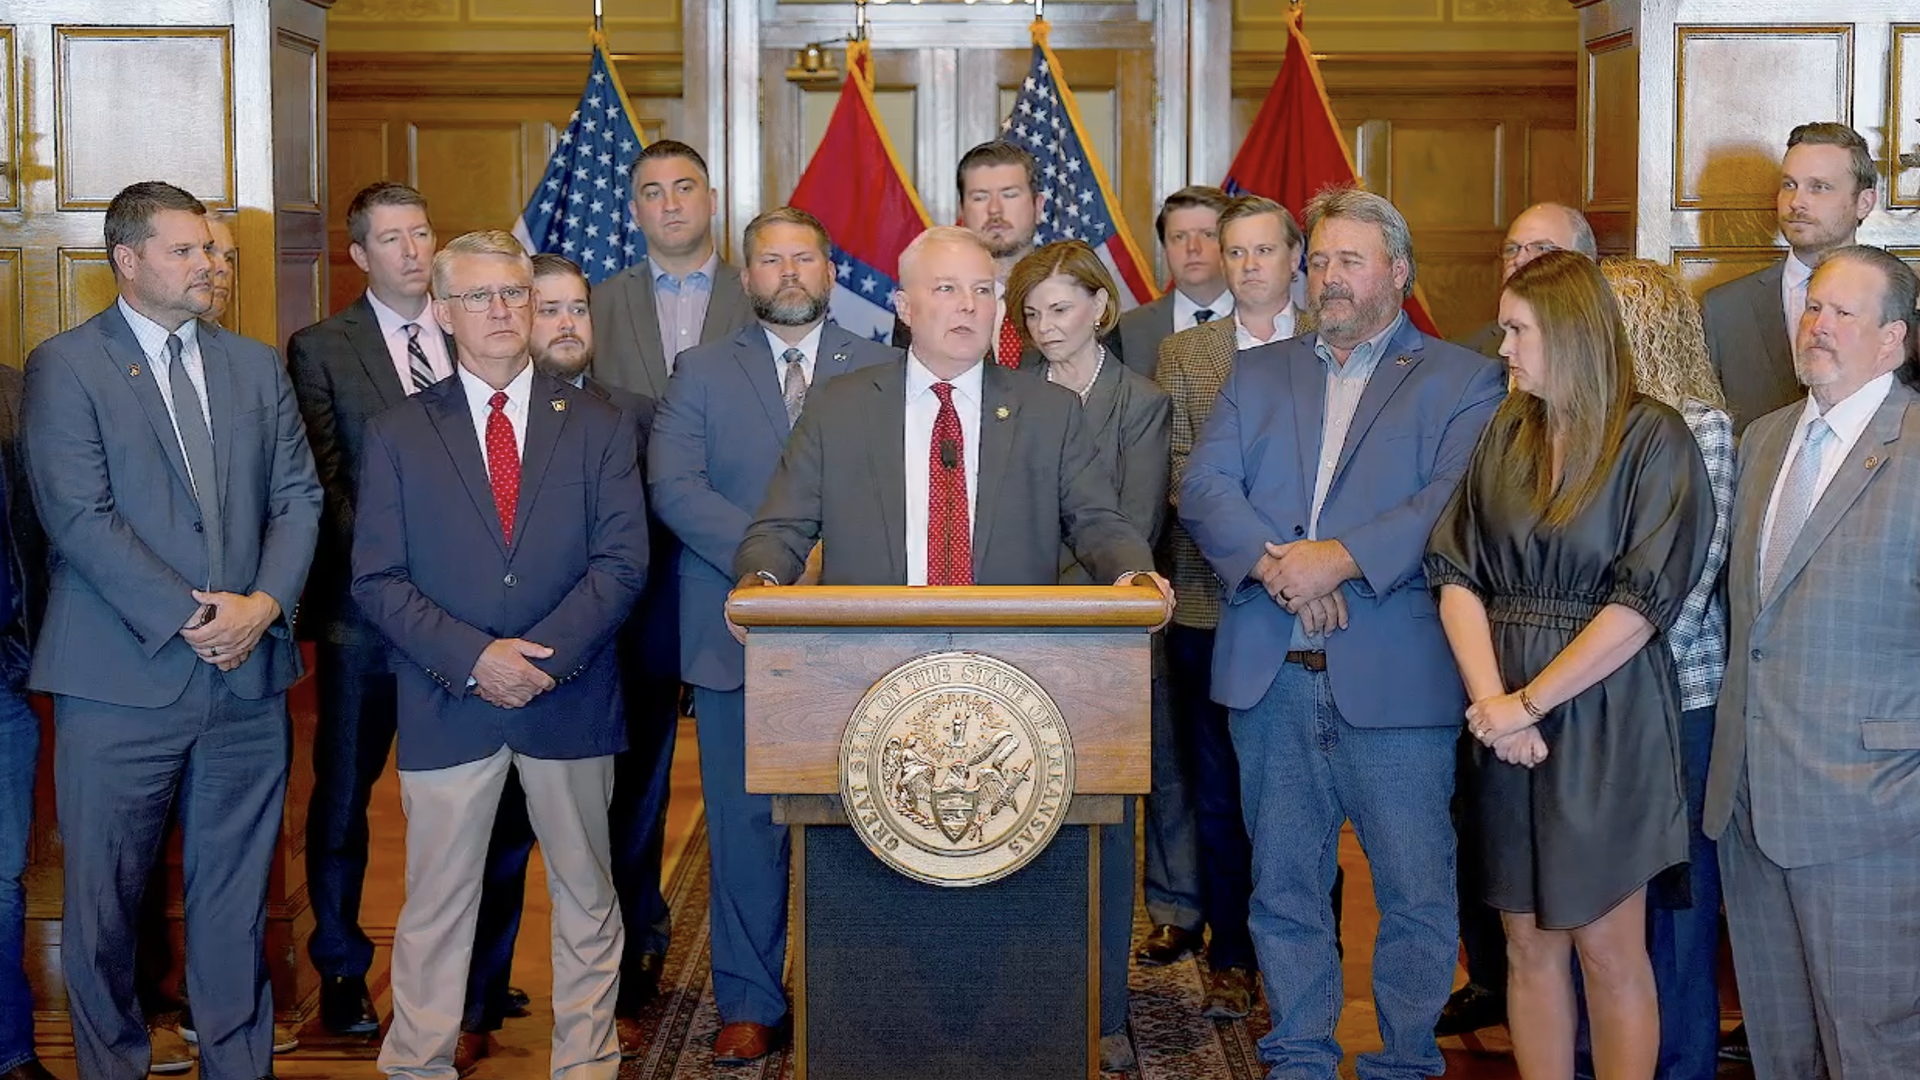 A screenshot of a press conference where Arkansas Attorney General Tim Griffin speaks from the podium, flanked by Gov. Sanders, cabinet members and lawmakers.